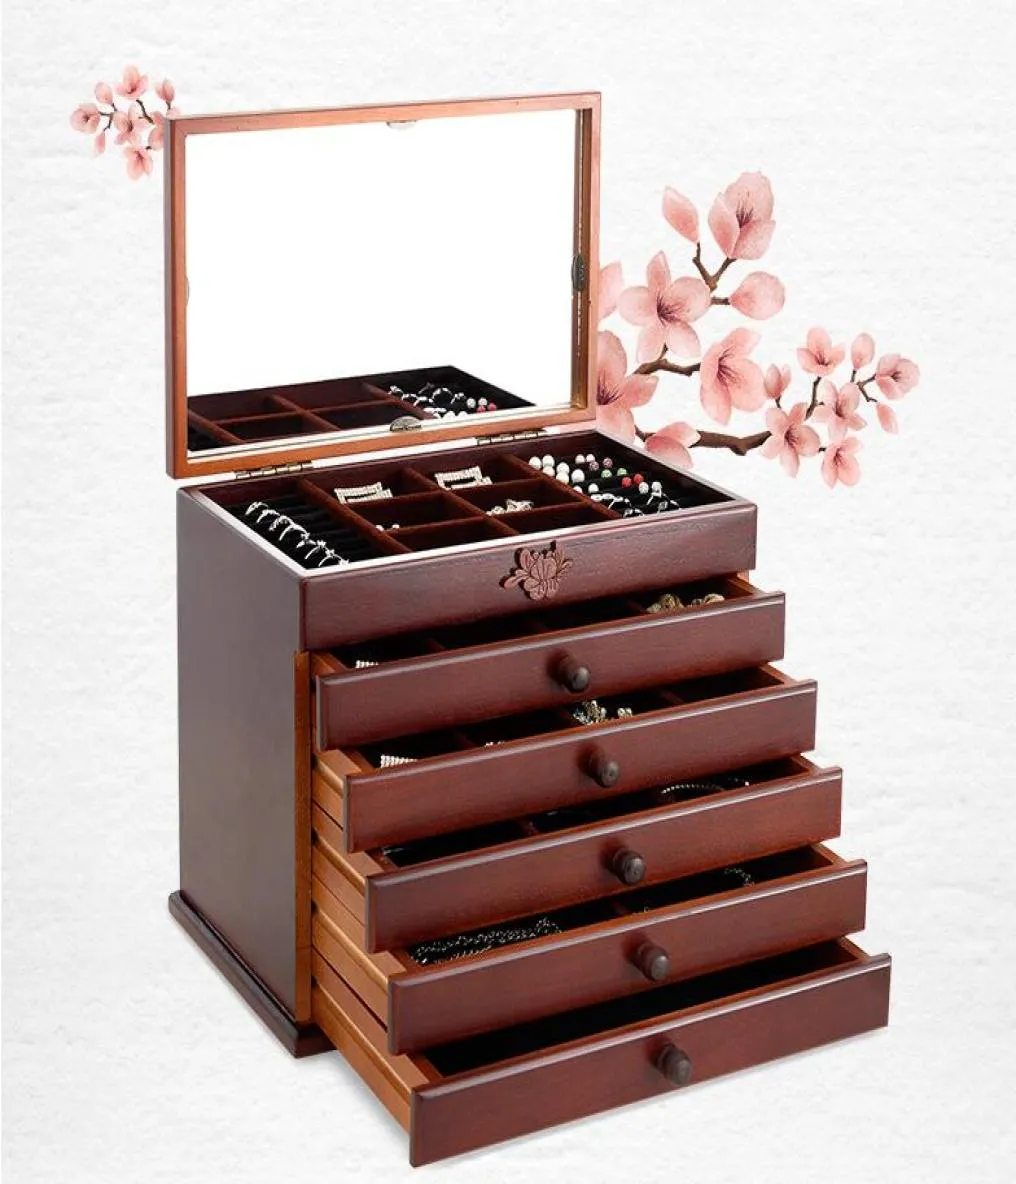 wooden handle With mirror Wood Jewelry Box Storage Gift Display Box Jewelry Lagre Gift Box Packaging casket gift boxes Bins6966111